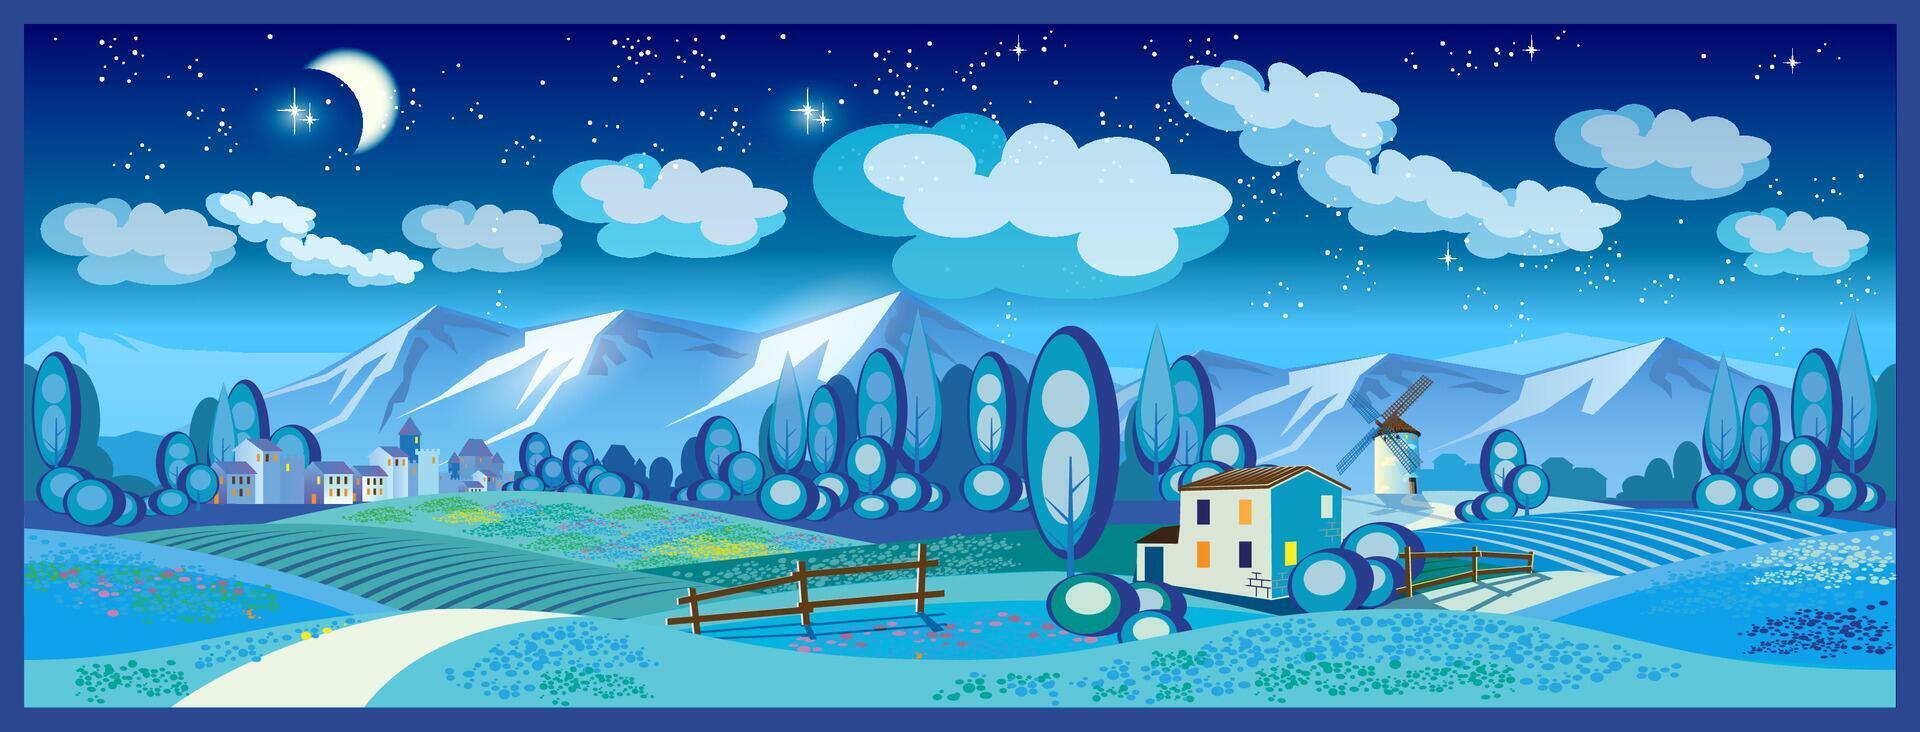 Village, farming, beautiful landscape of fields and mountains at night. Seamless horizontally if needed vector